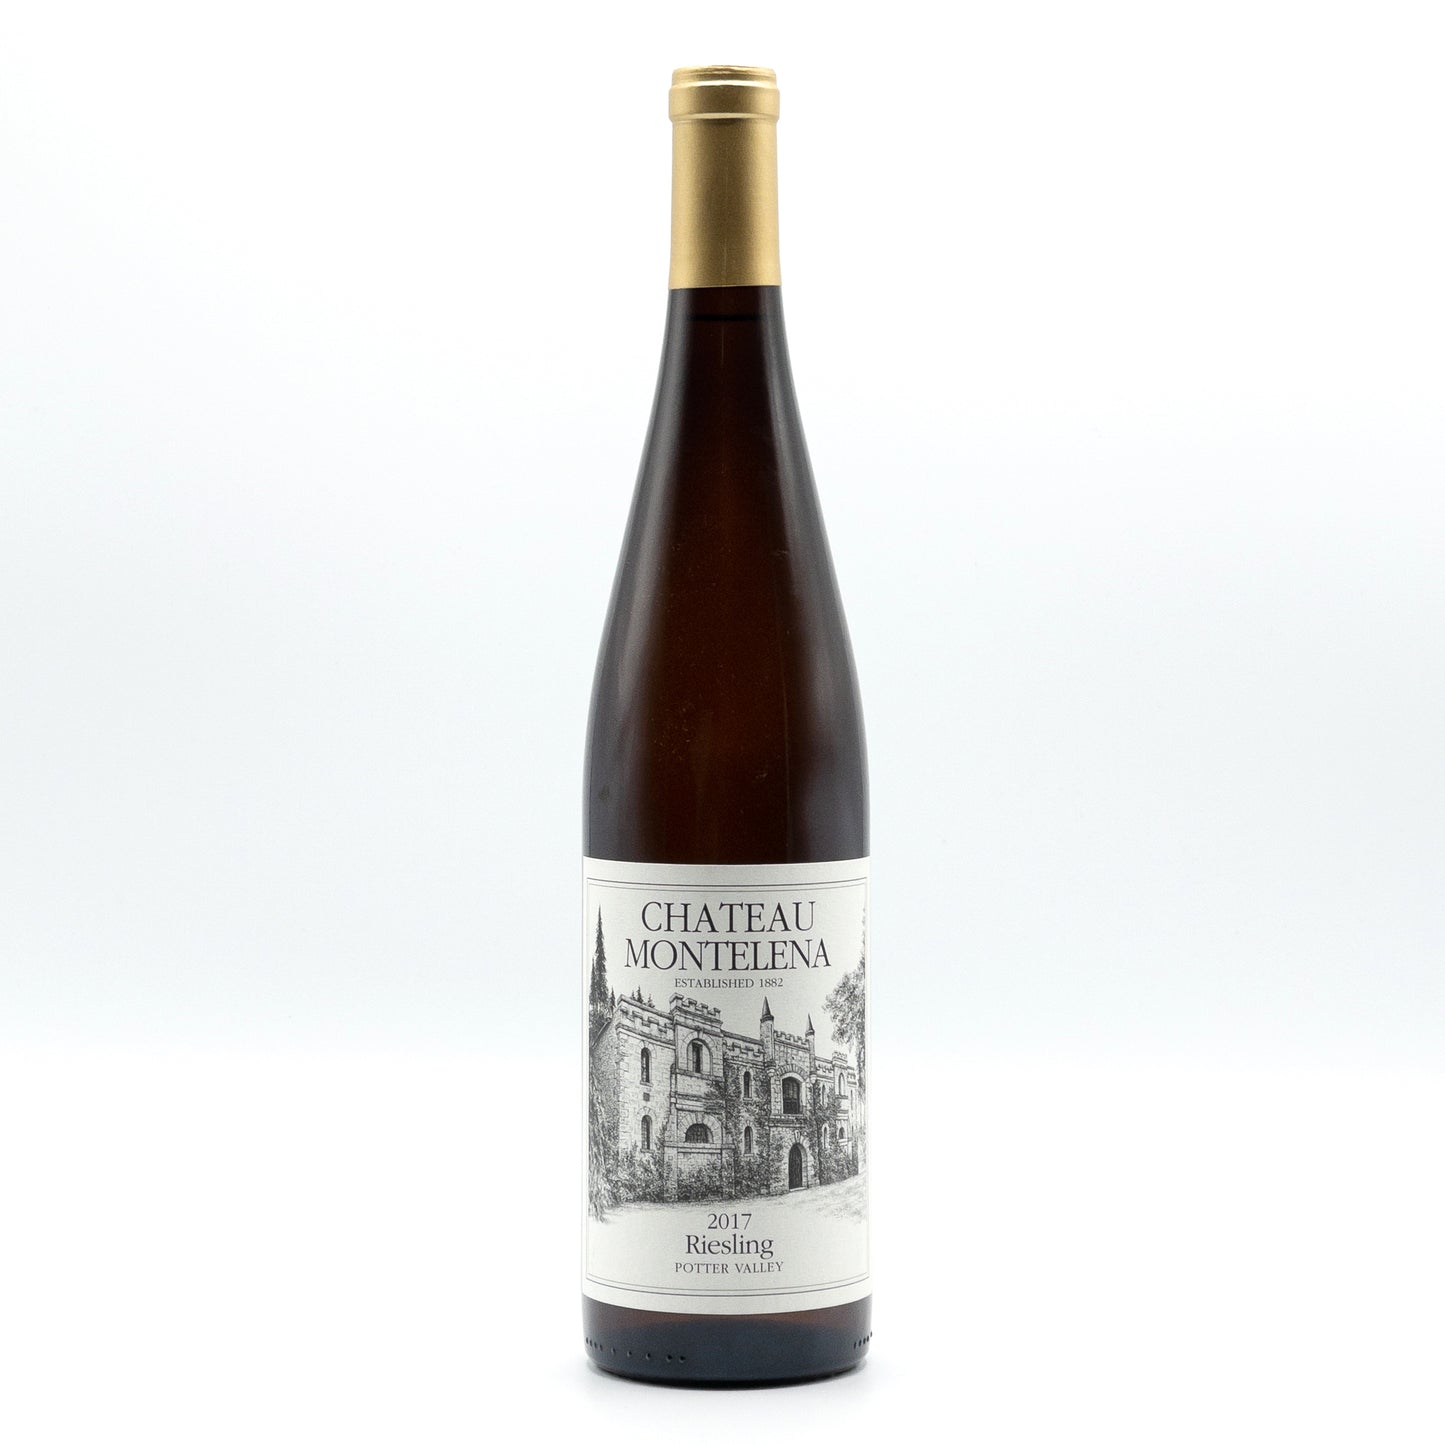 Riesling, Chateau Montelena